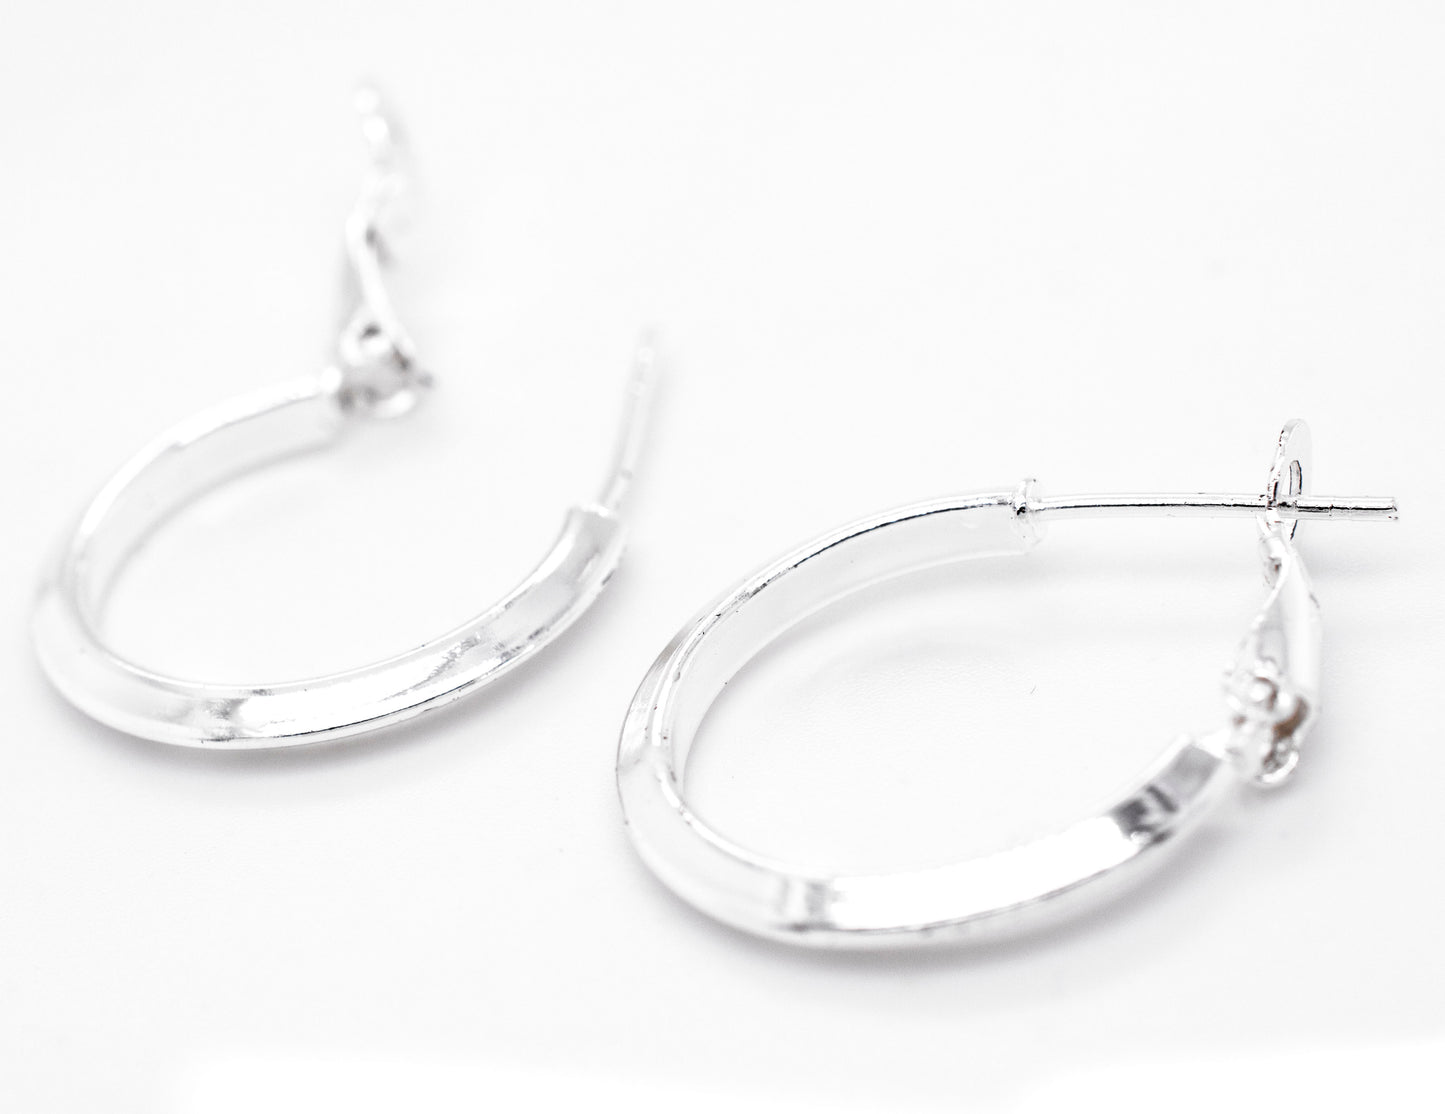 A pair of Super Silver Easy Latch Hoop Earrings on a white surface.